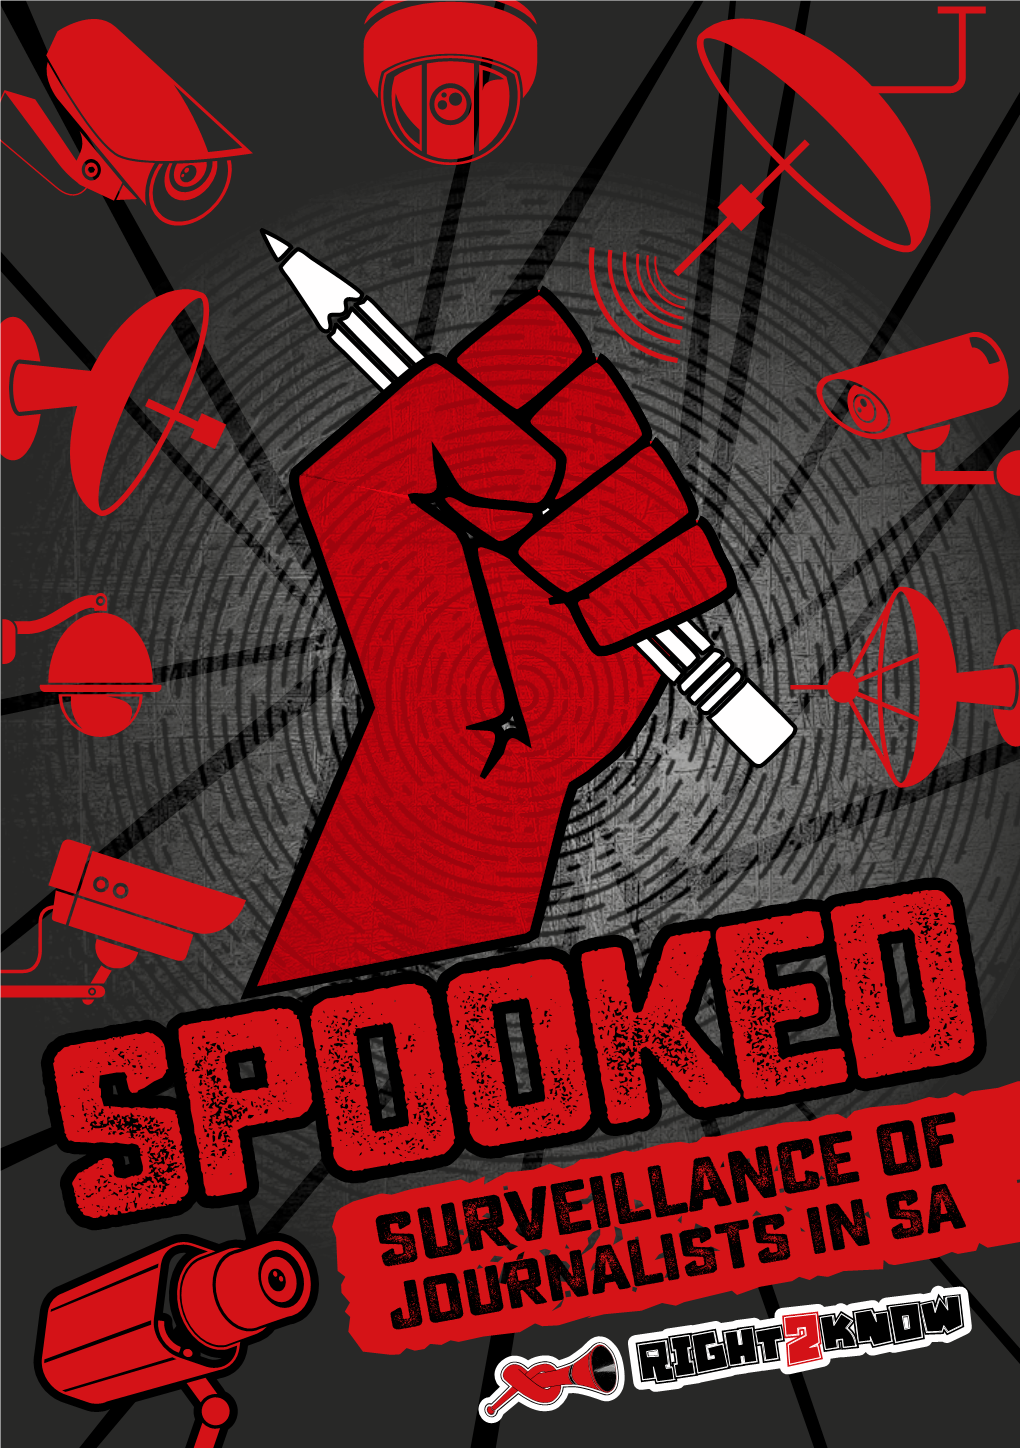 Spooked: Surveillance of Journalists in SA